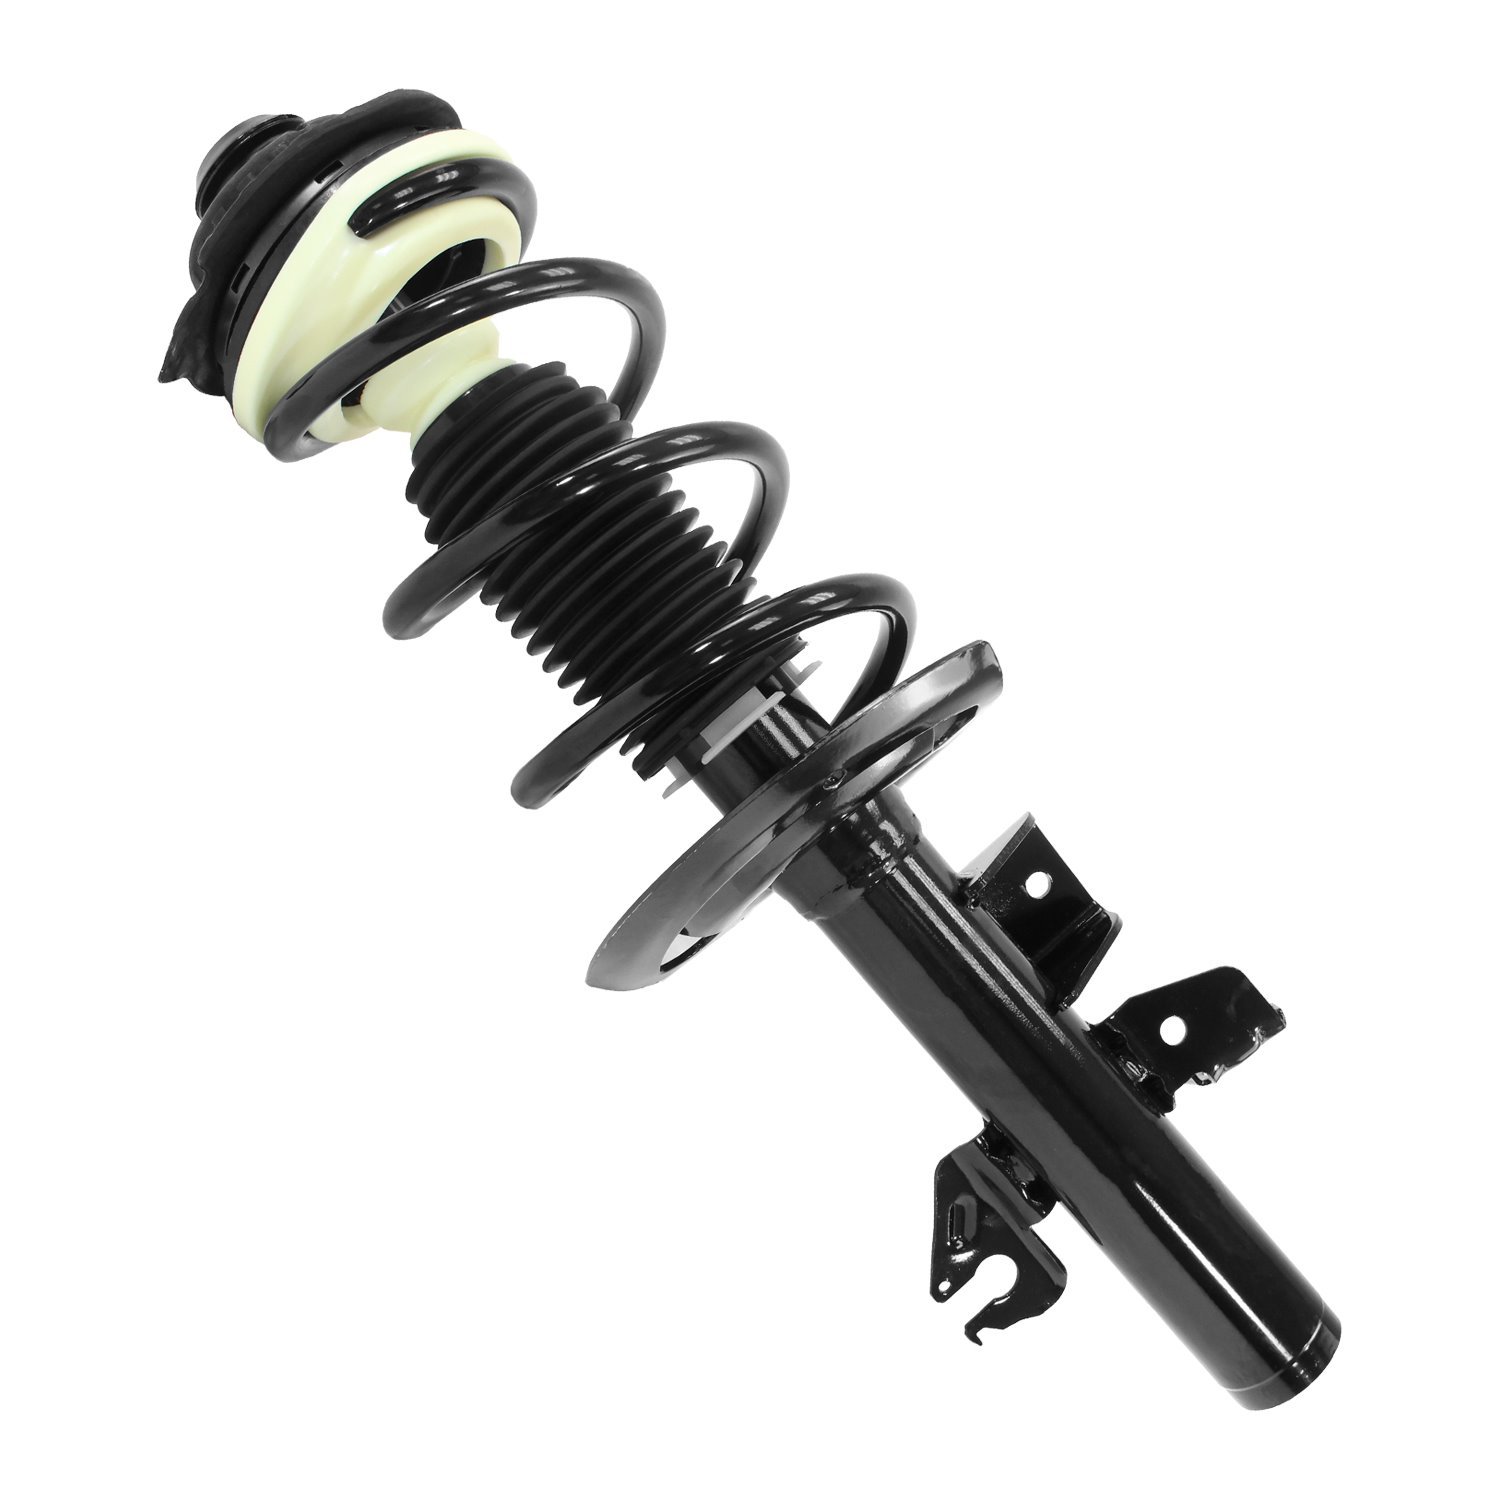 13674 Rear Suspension Strut & Coil Spring Assemby Fits Select Chrysler 200